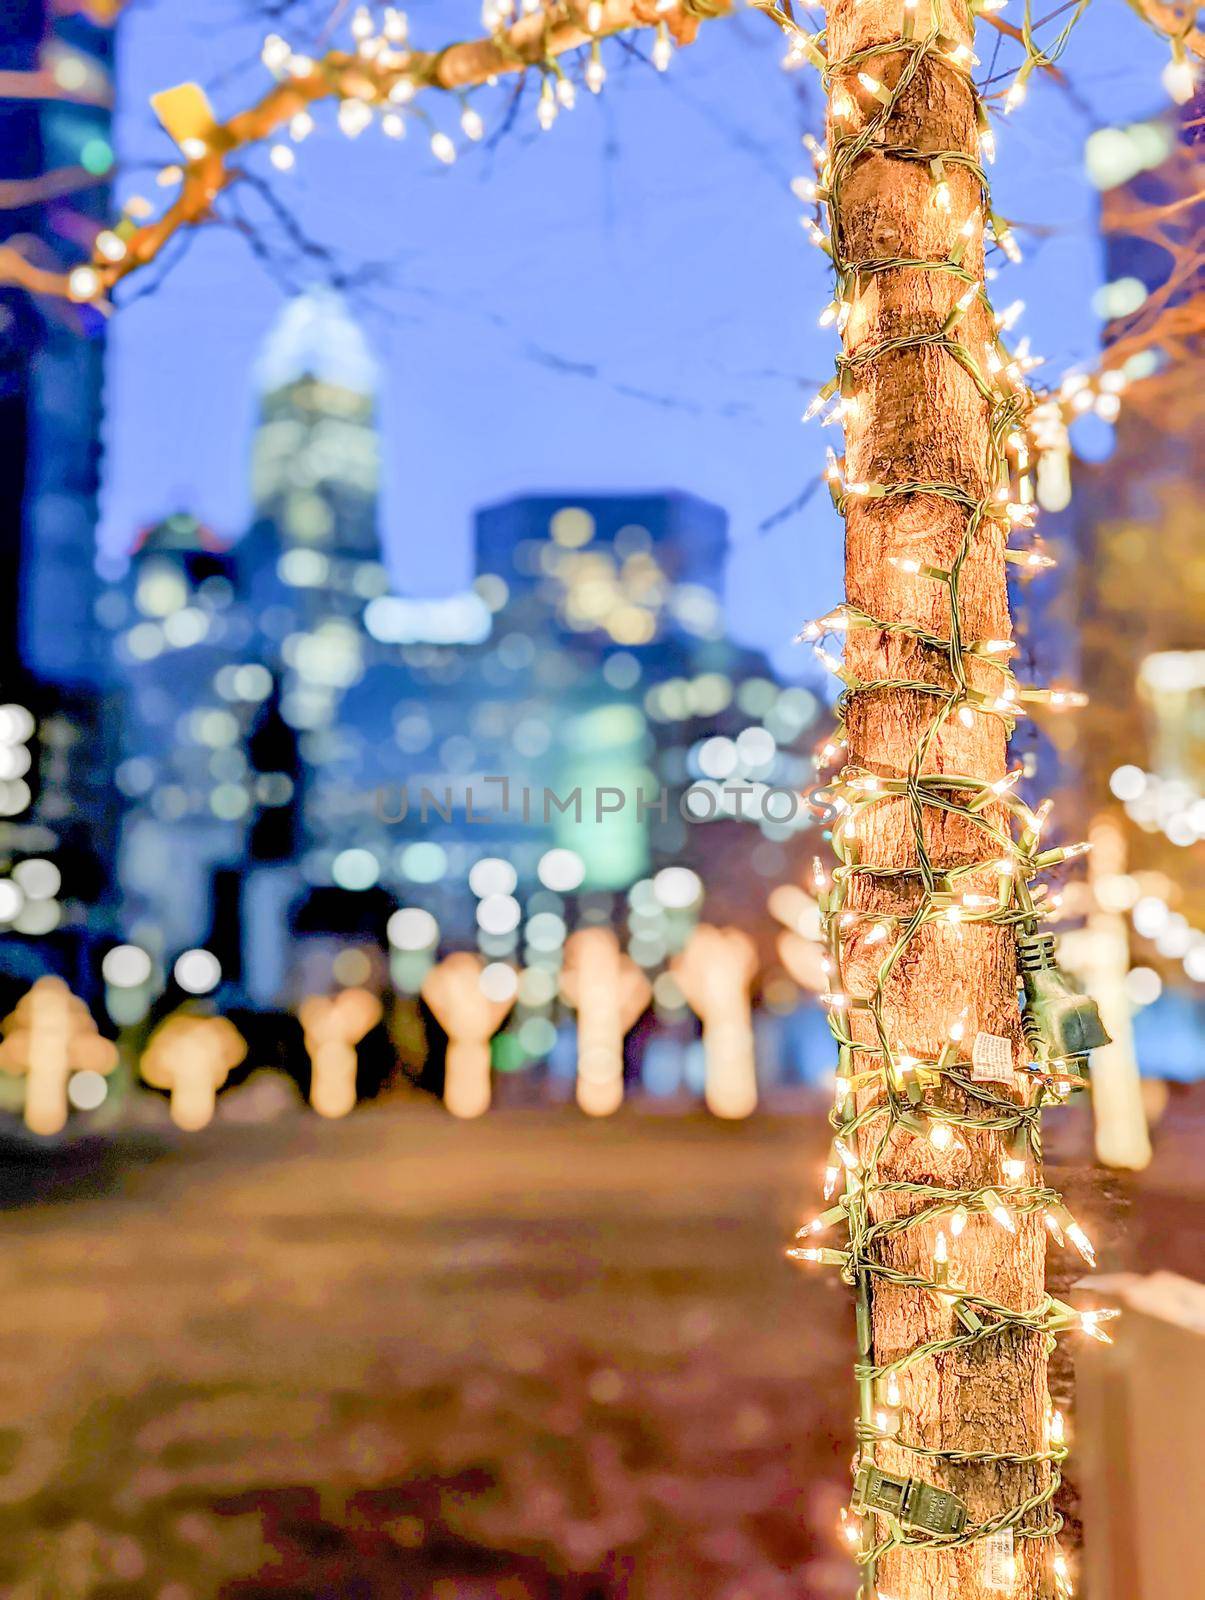 charlotte nc early morning decorated with holiday lights by digidreamgrafix